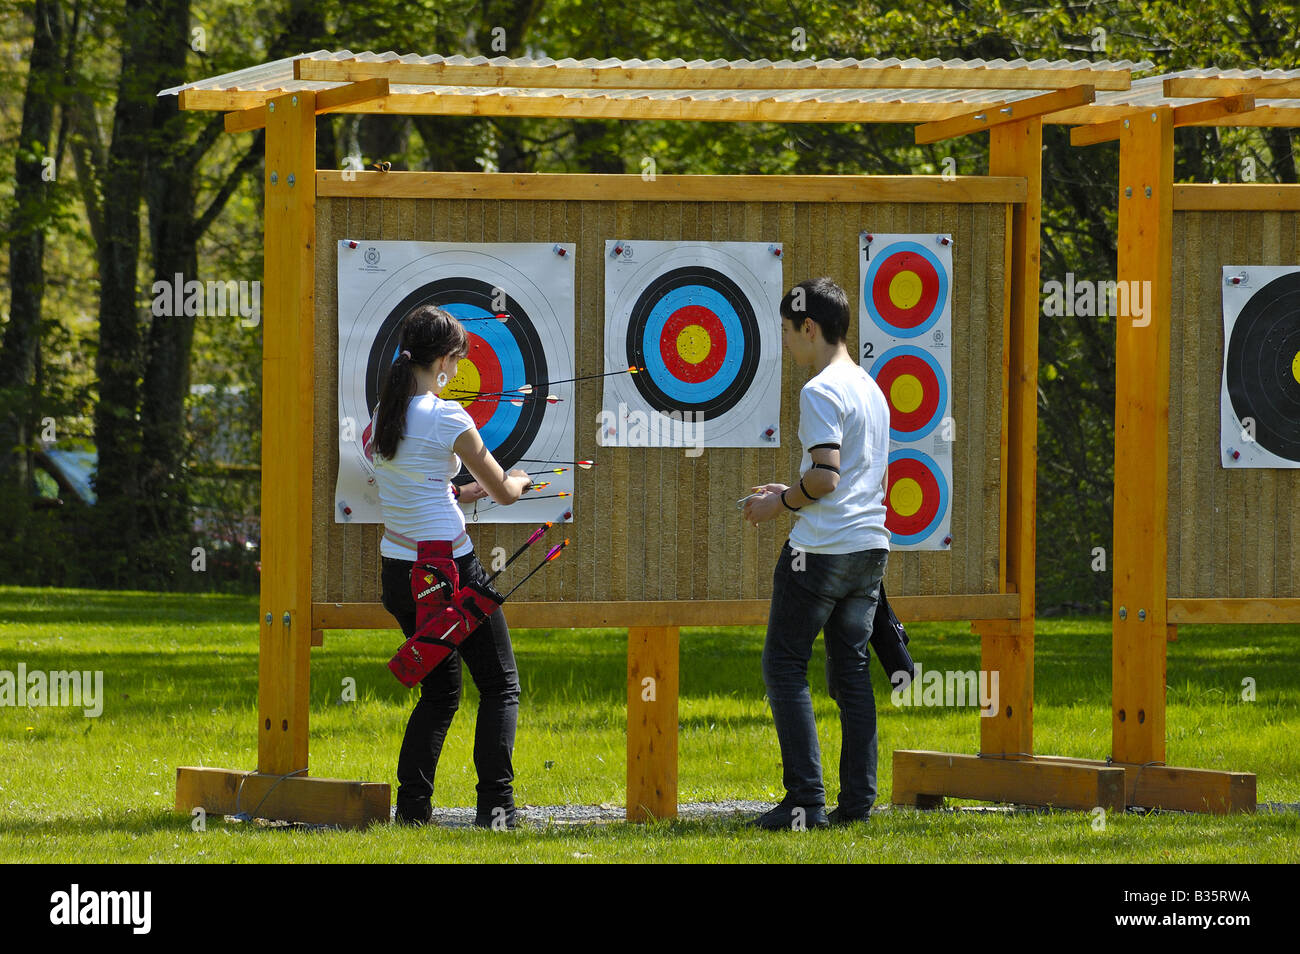 Two archers pull their arrows out of the target, checking their score. Stock Photo